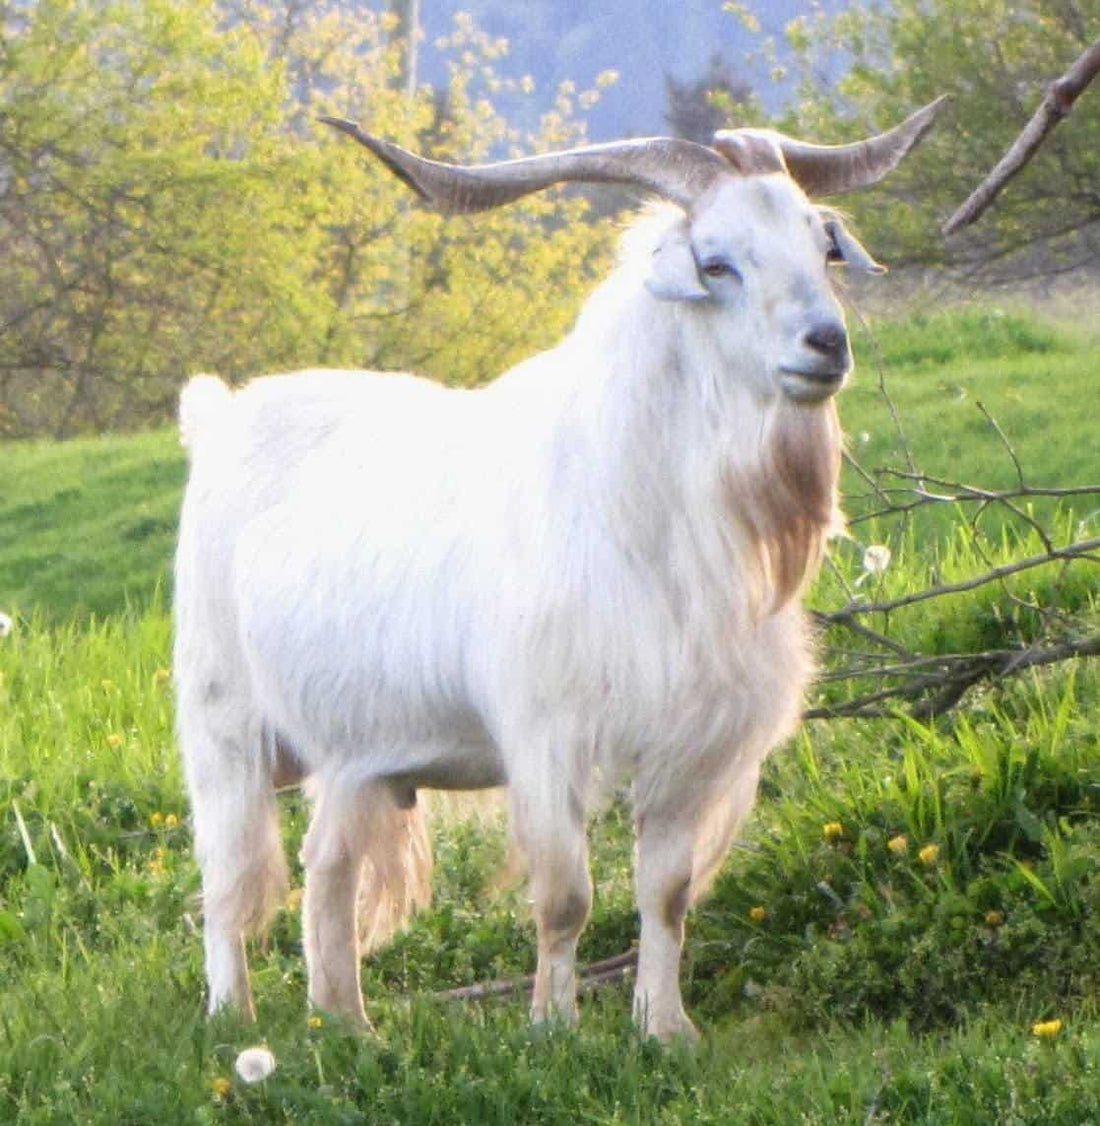 how much is a cashmere goat worth?